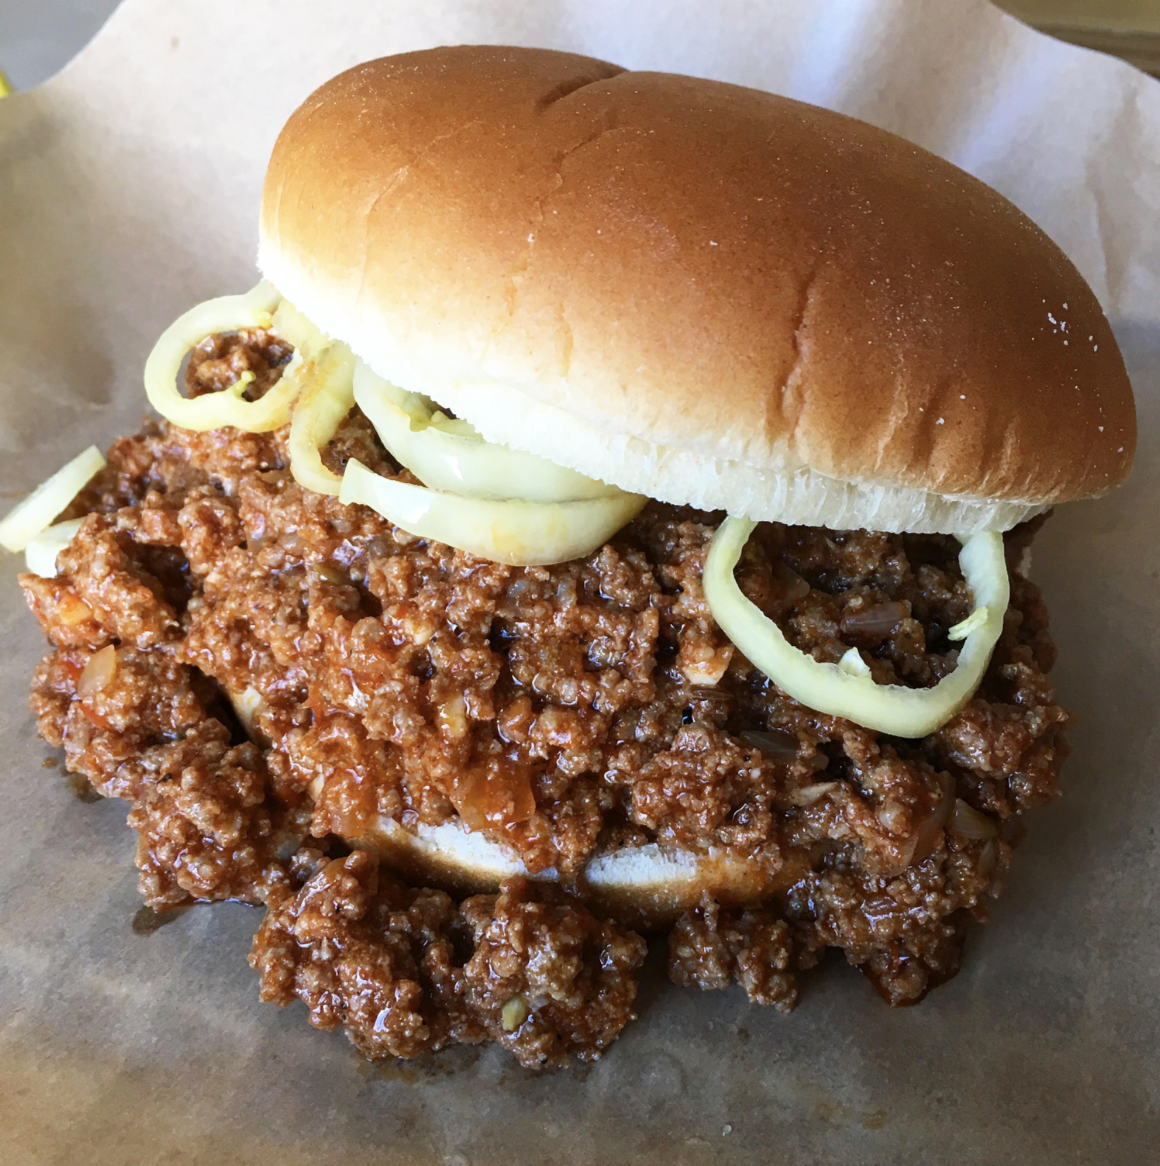 A close-up of a sloppy joe sandwich with ground beef and onions on a bun